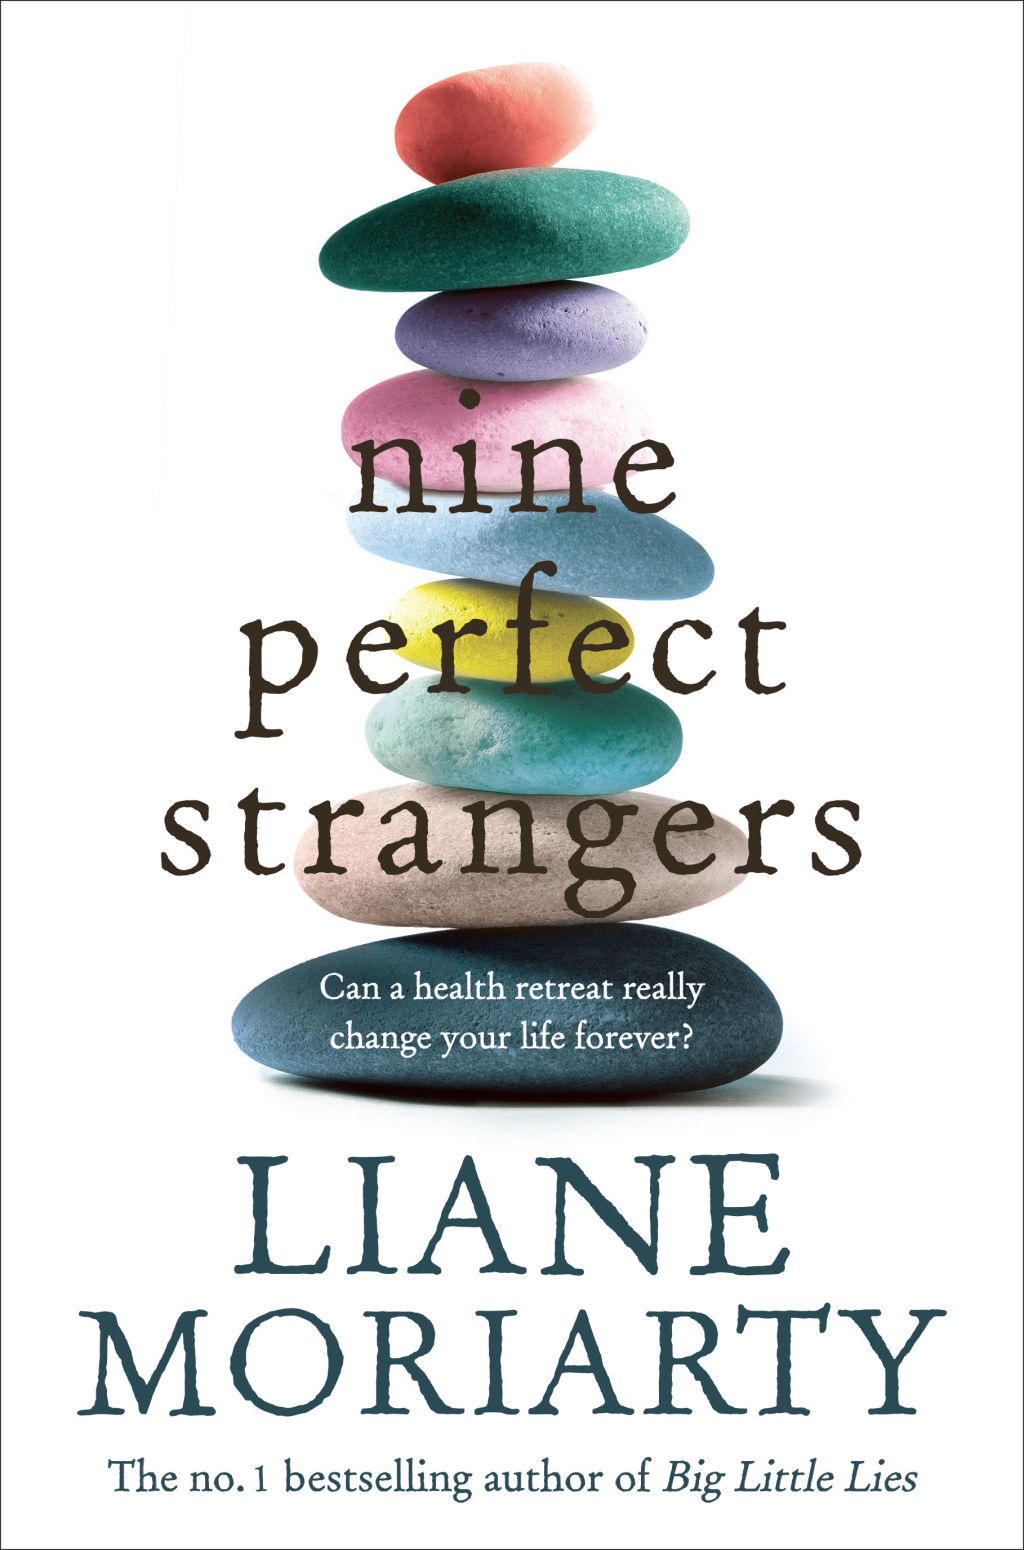 reviews of the book nine perfect strangers